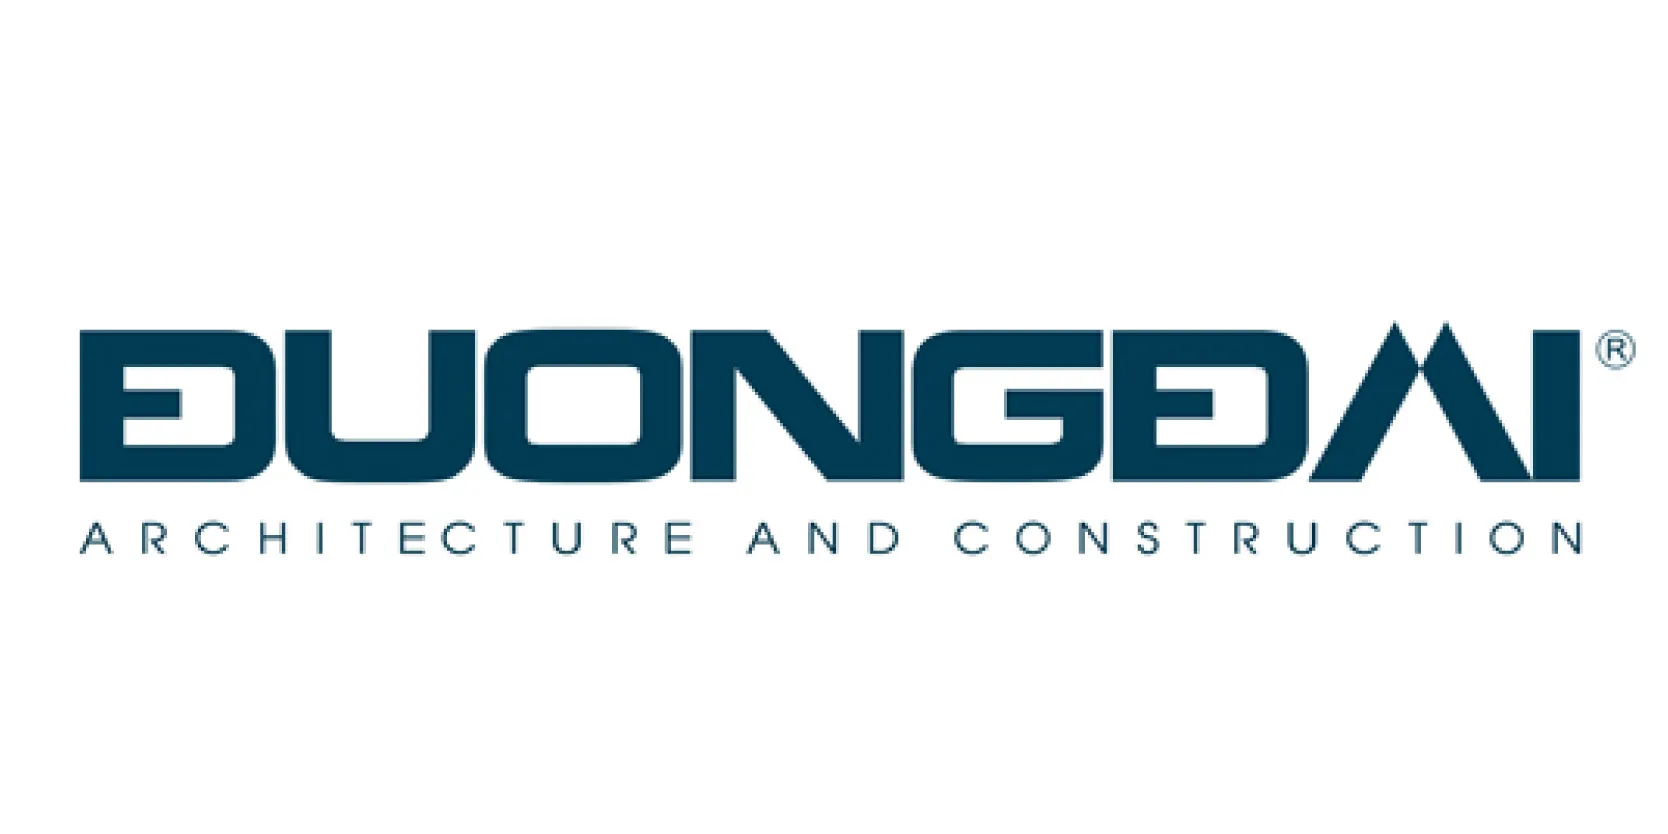 Duong Dai architecture and construction logo which has full name of the company